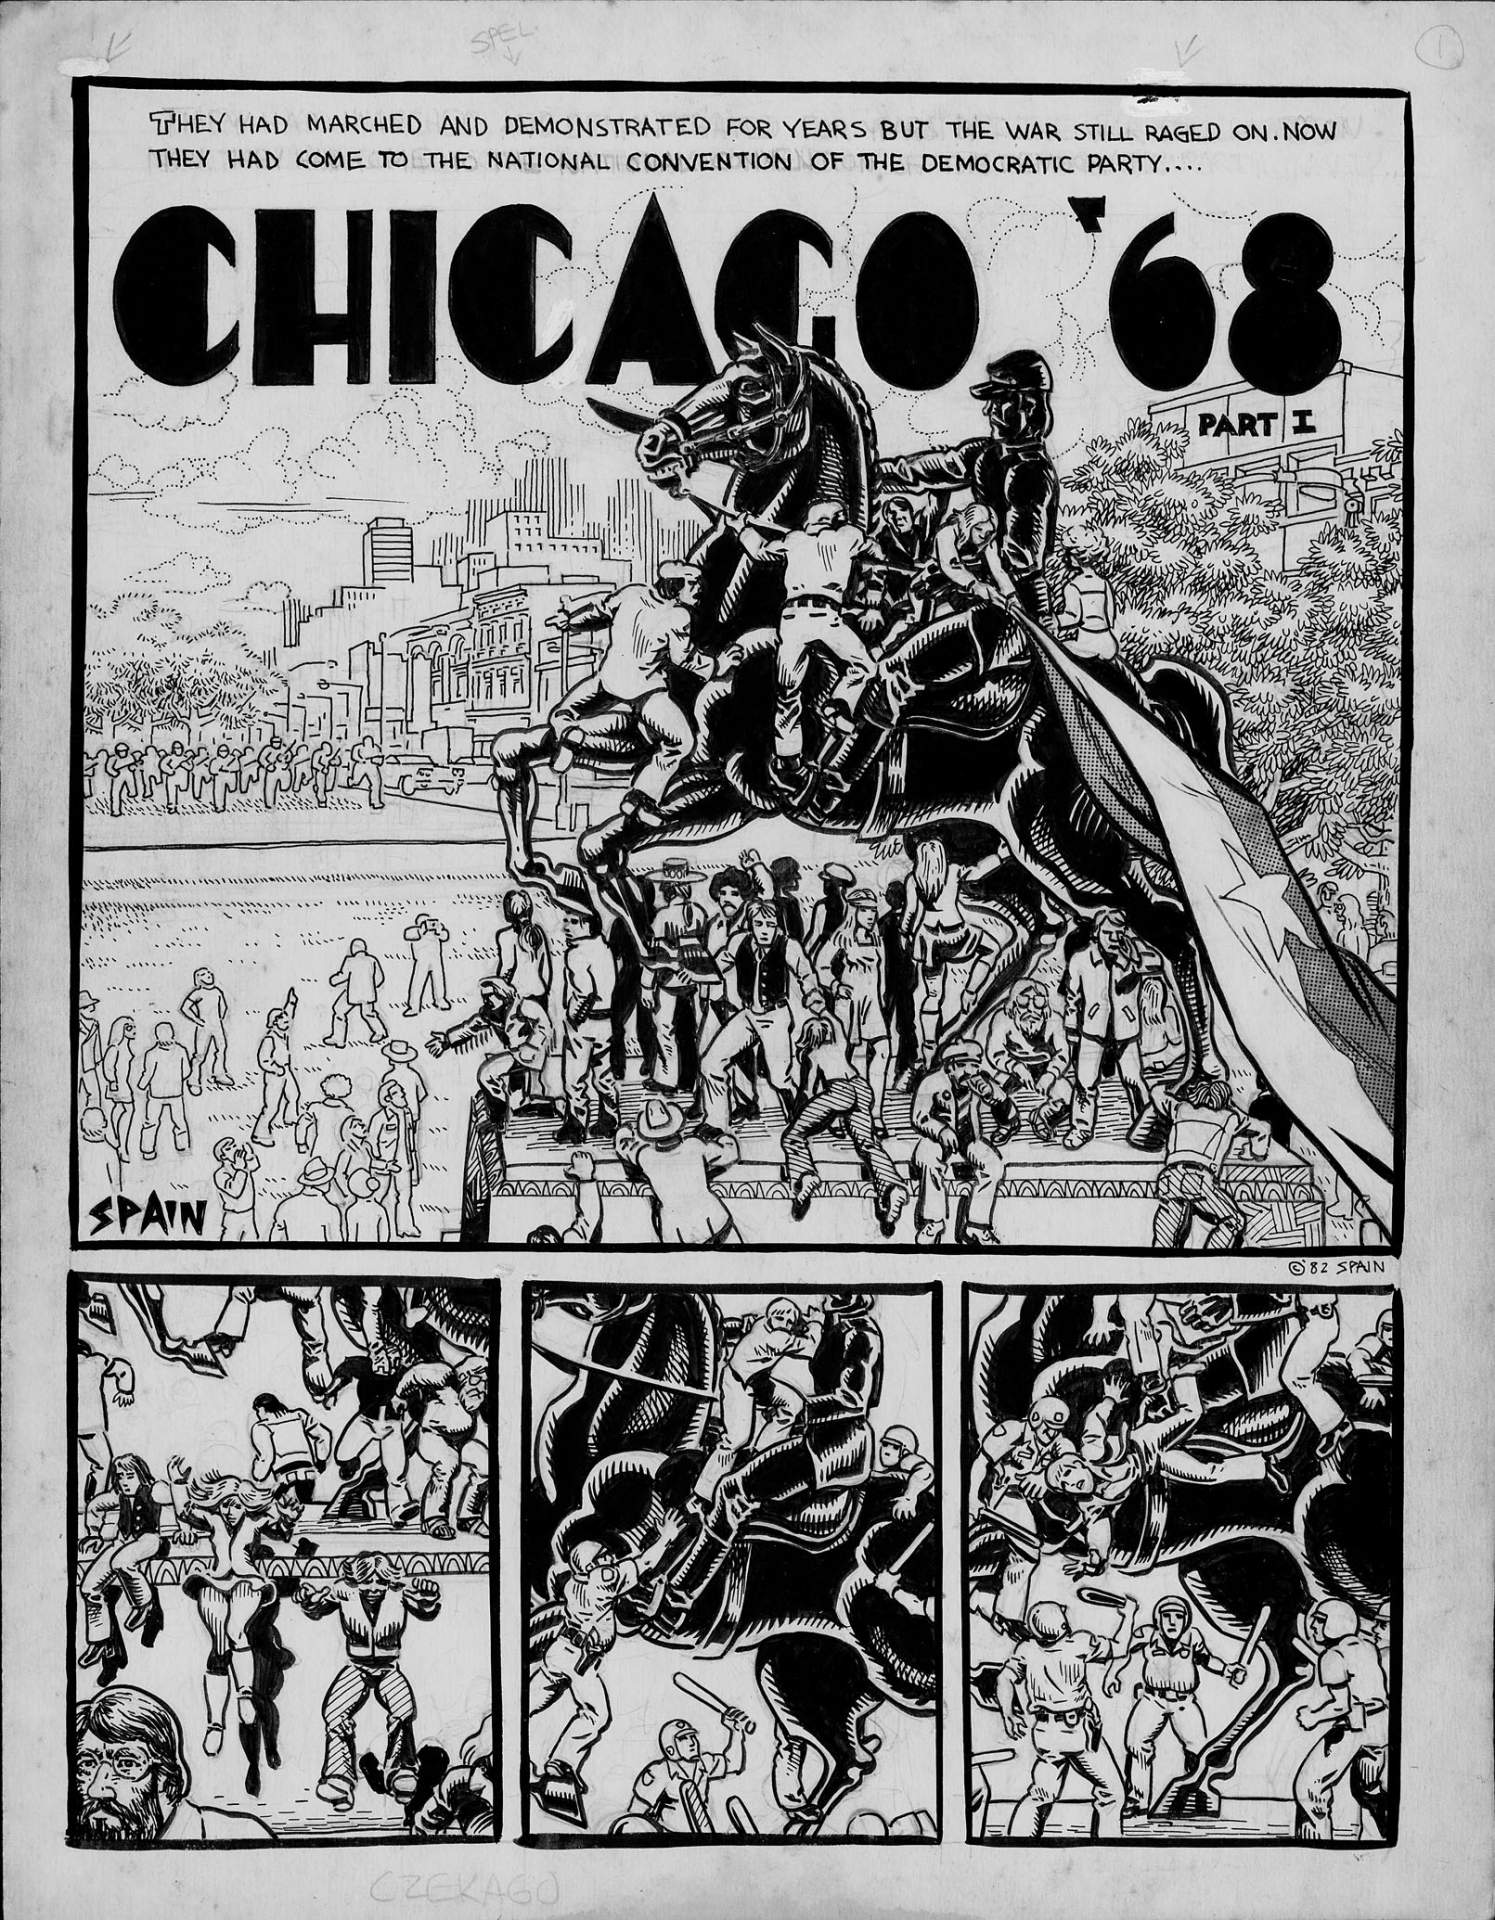 from My True Story: Chicago ’68, Part I, p. 46